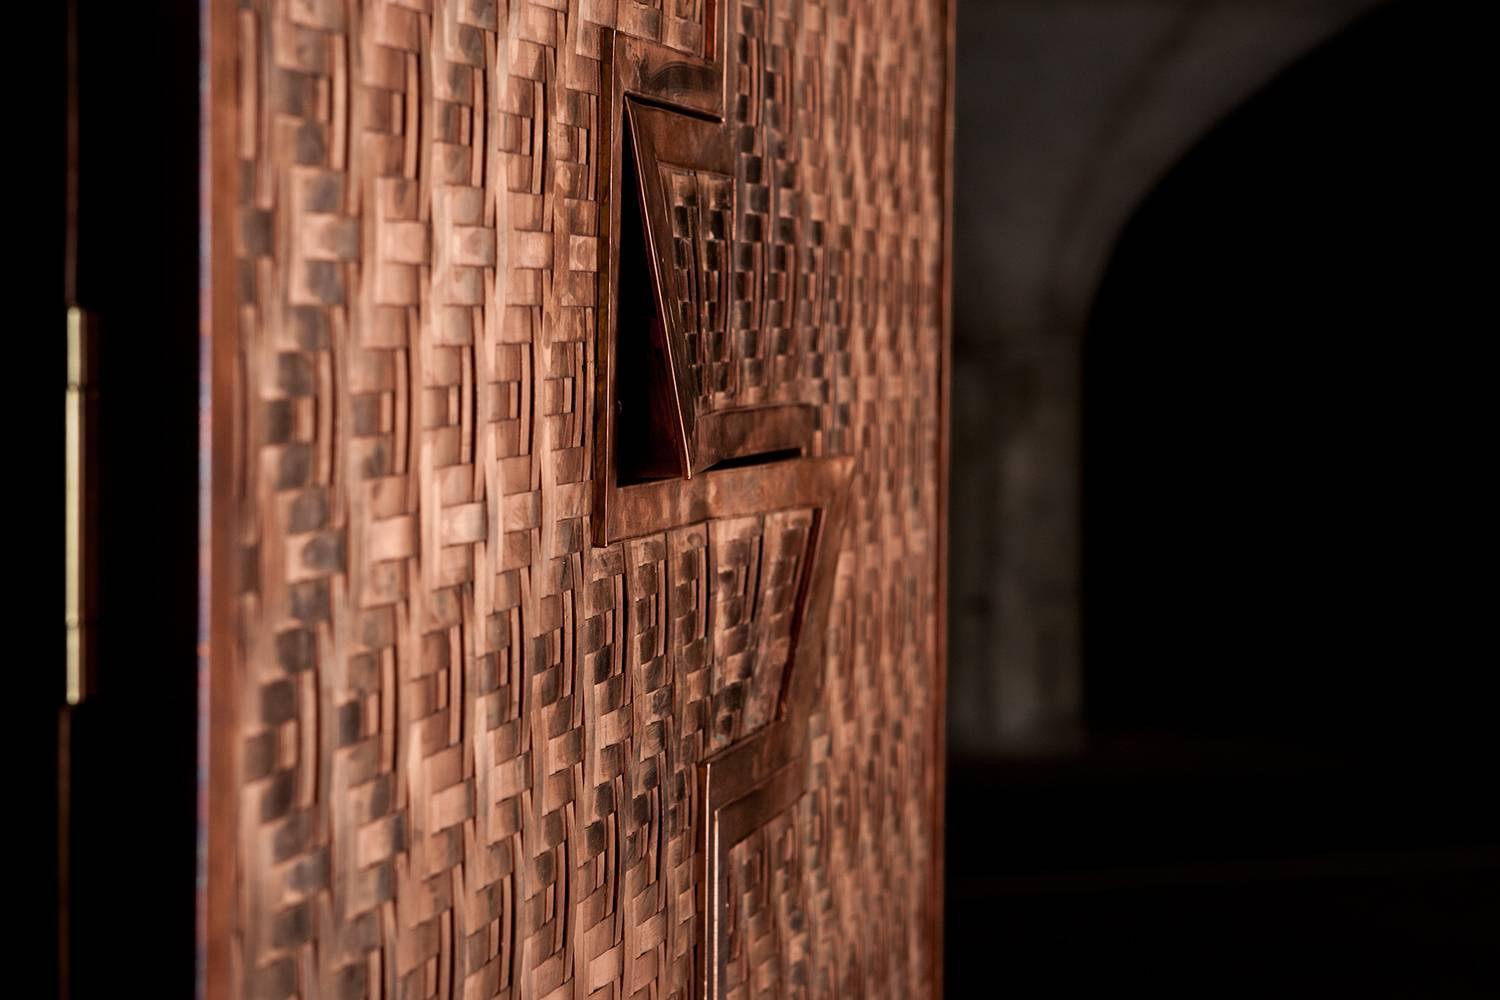 Michael Gittings Studio.
Steppes armoire
Blackened timber frame with copper
exterior and woven copper doors
Measures; 100 cm 180 cm 55 cm
Edition of 3.

Michael Gittings
Melbourne based designer Michael Gittings aims to
challenge